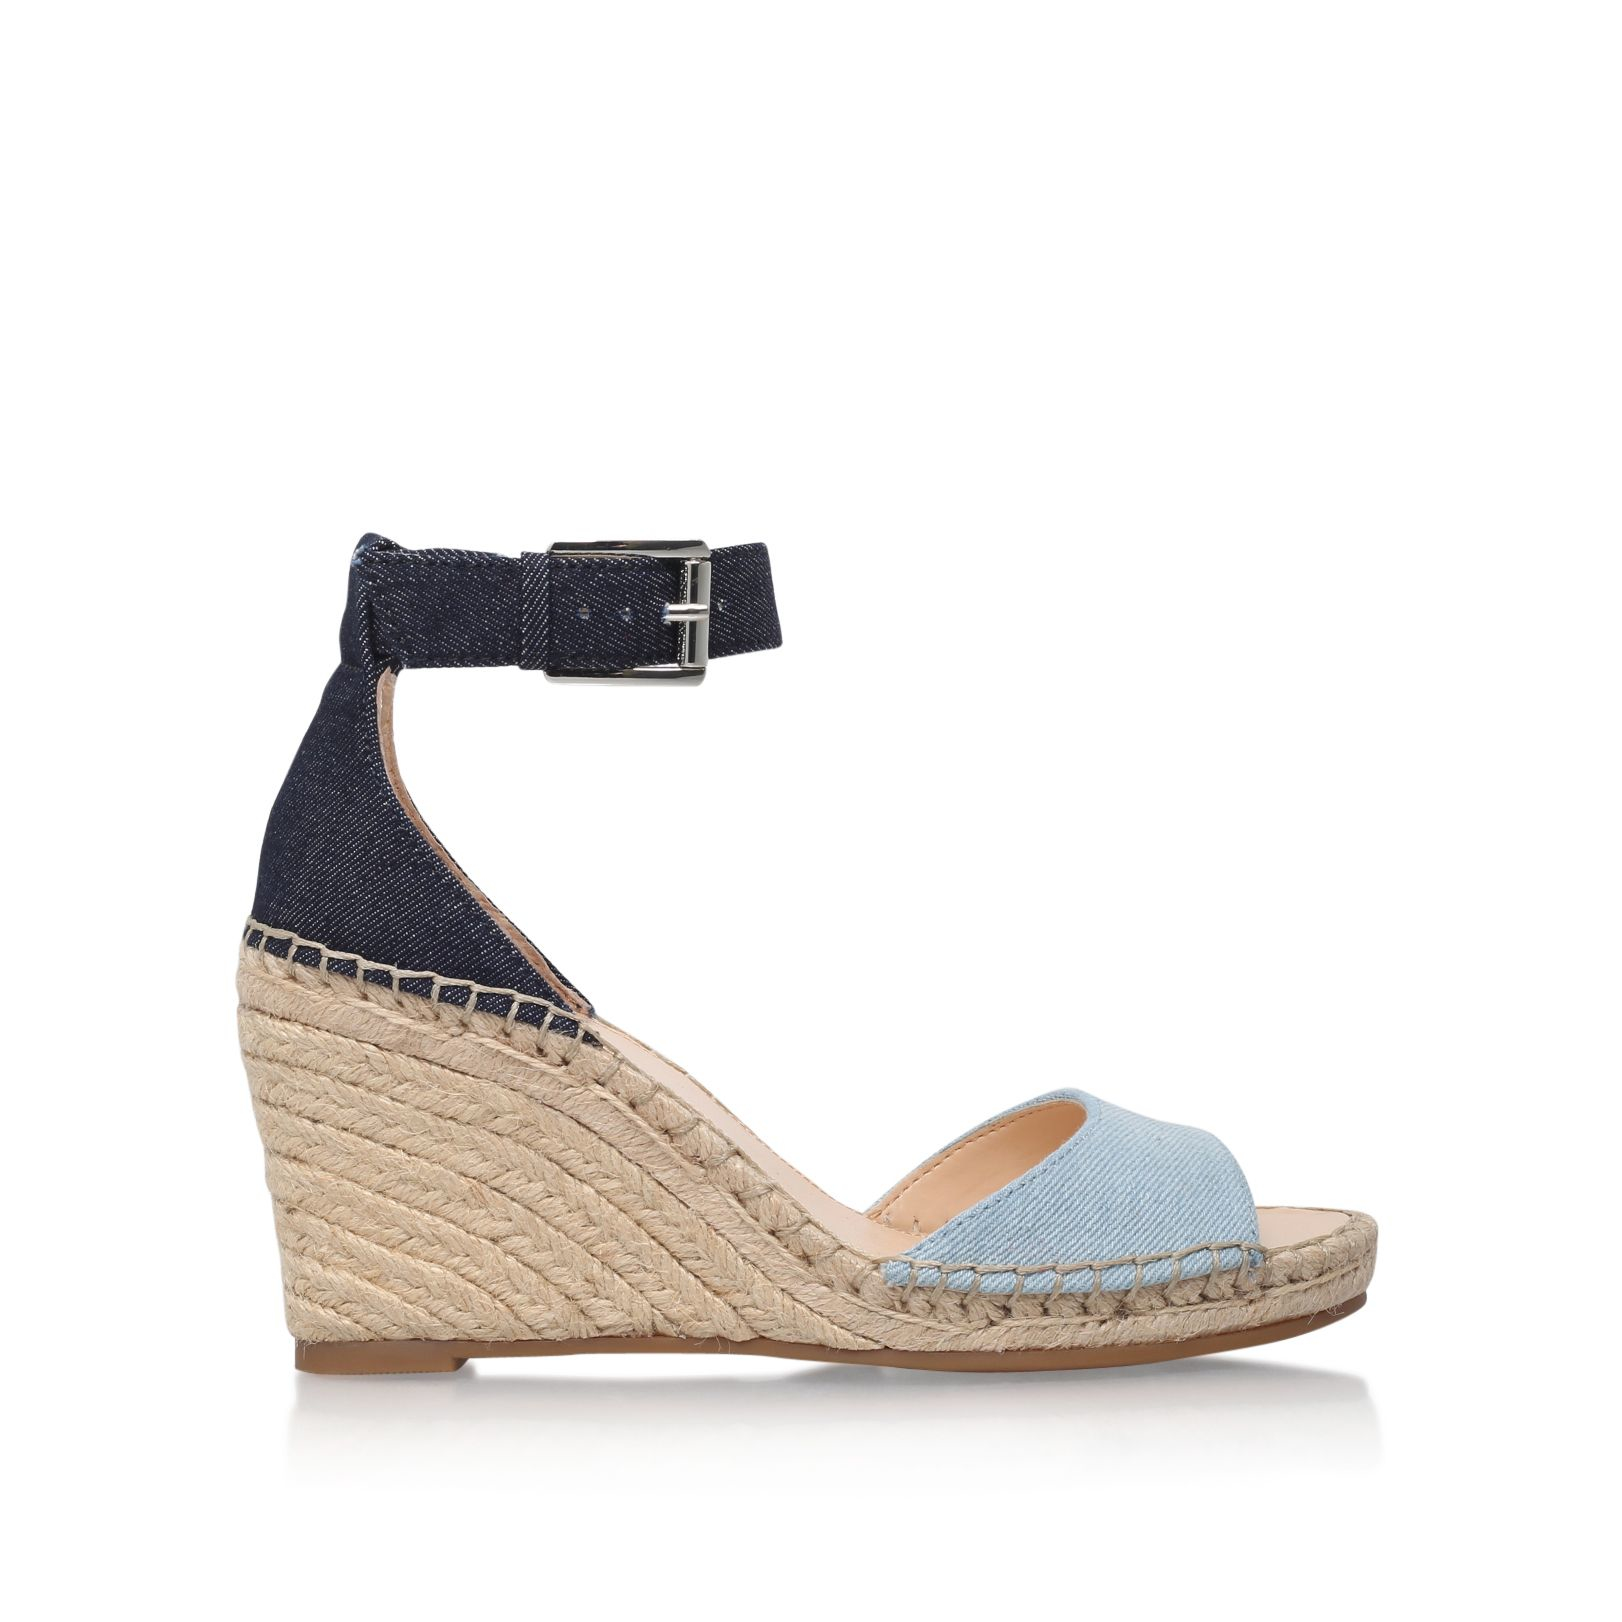 Vince camuto Torian High Wedge Heel Sandals in Blue | Lyst